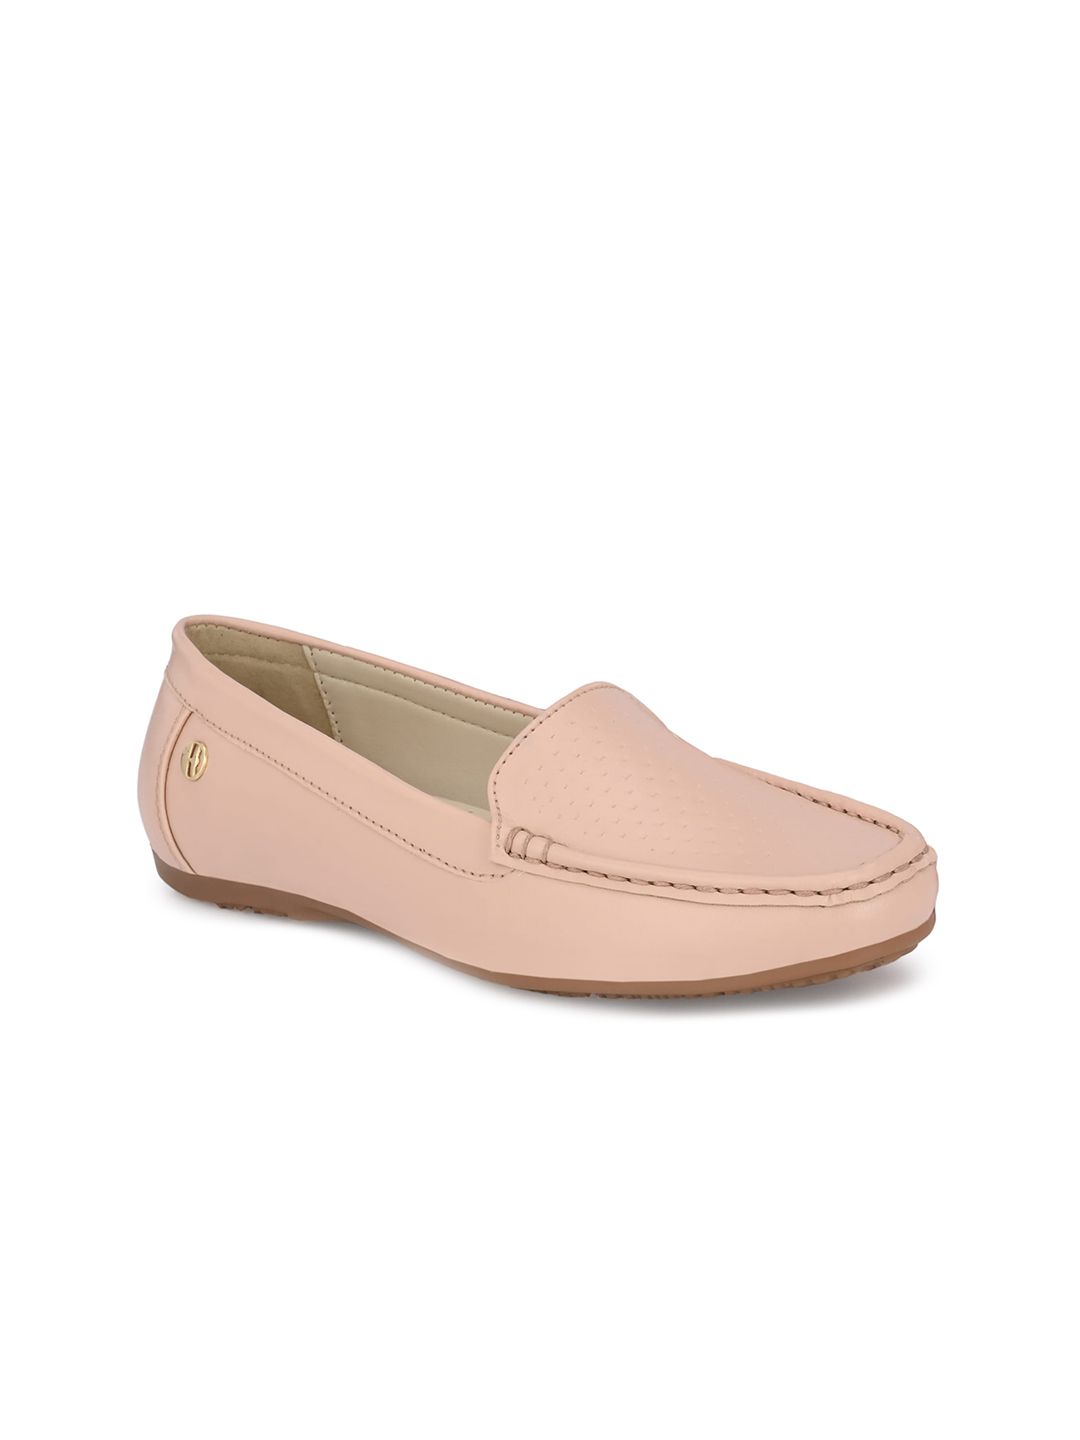 ELLE Women Perforations Loafers Price in India